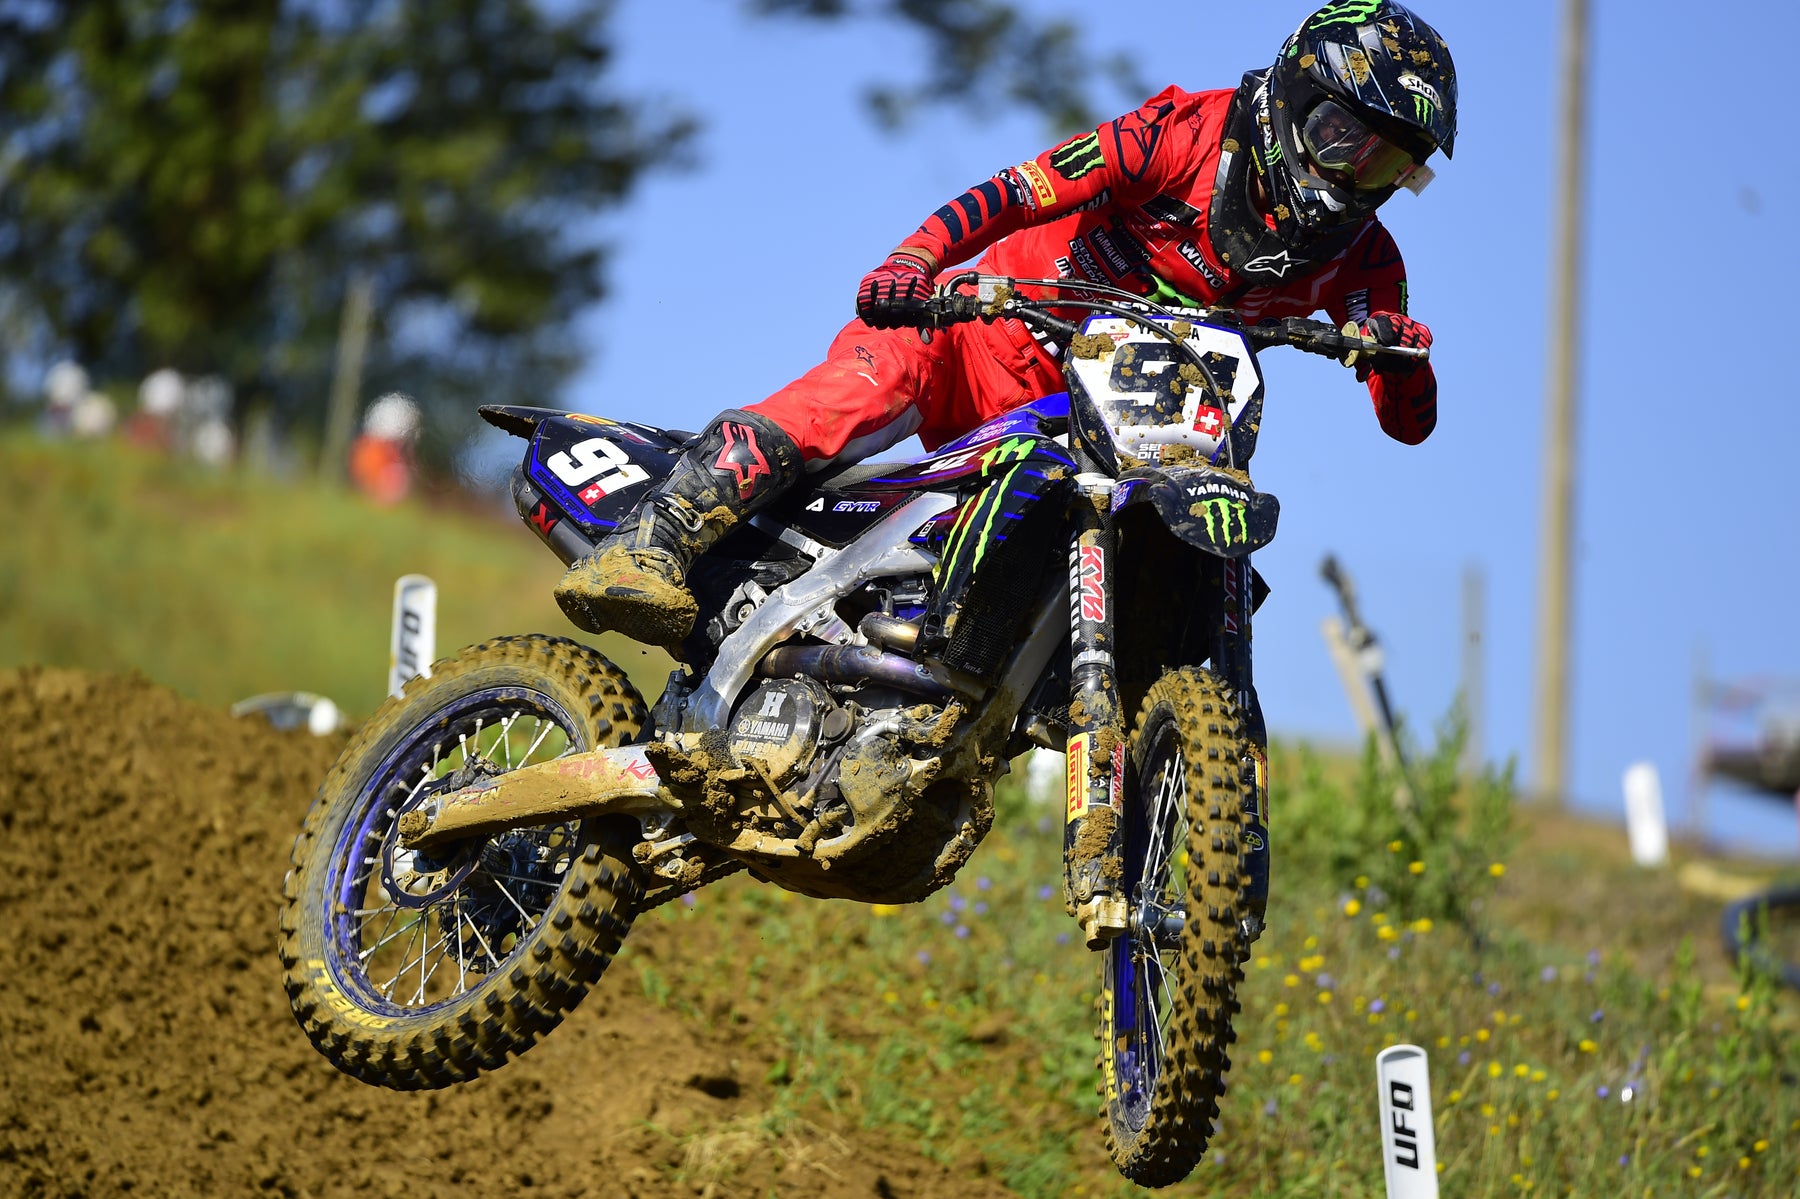 SENSATIONAL SEEWER SECURES MAIDEN MXGP RACE WIN AT FAENZA